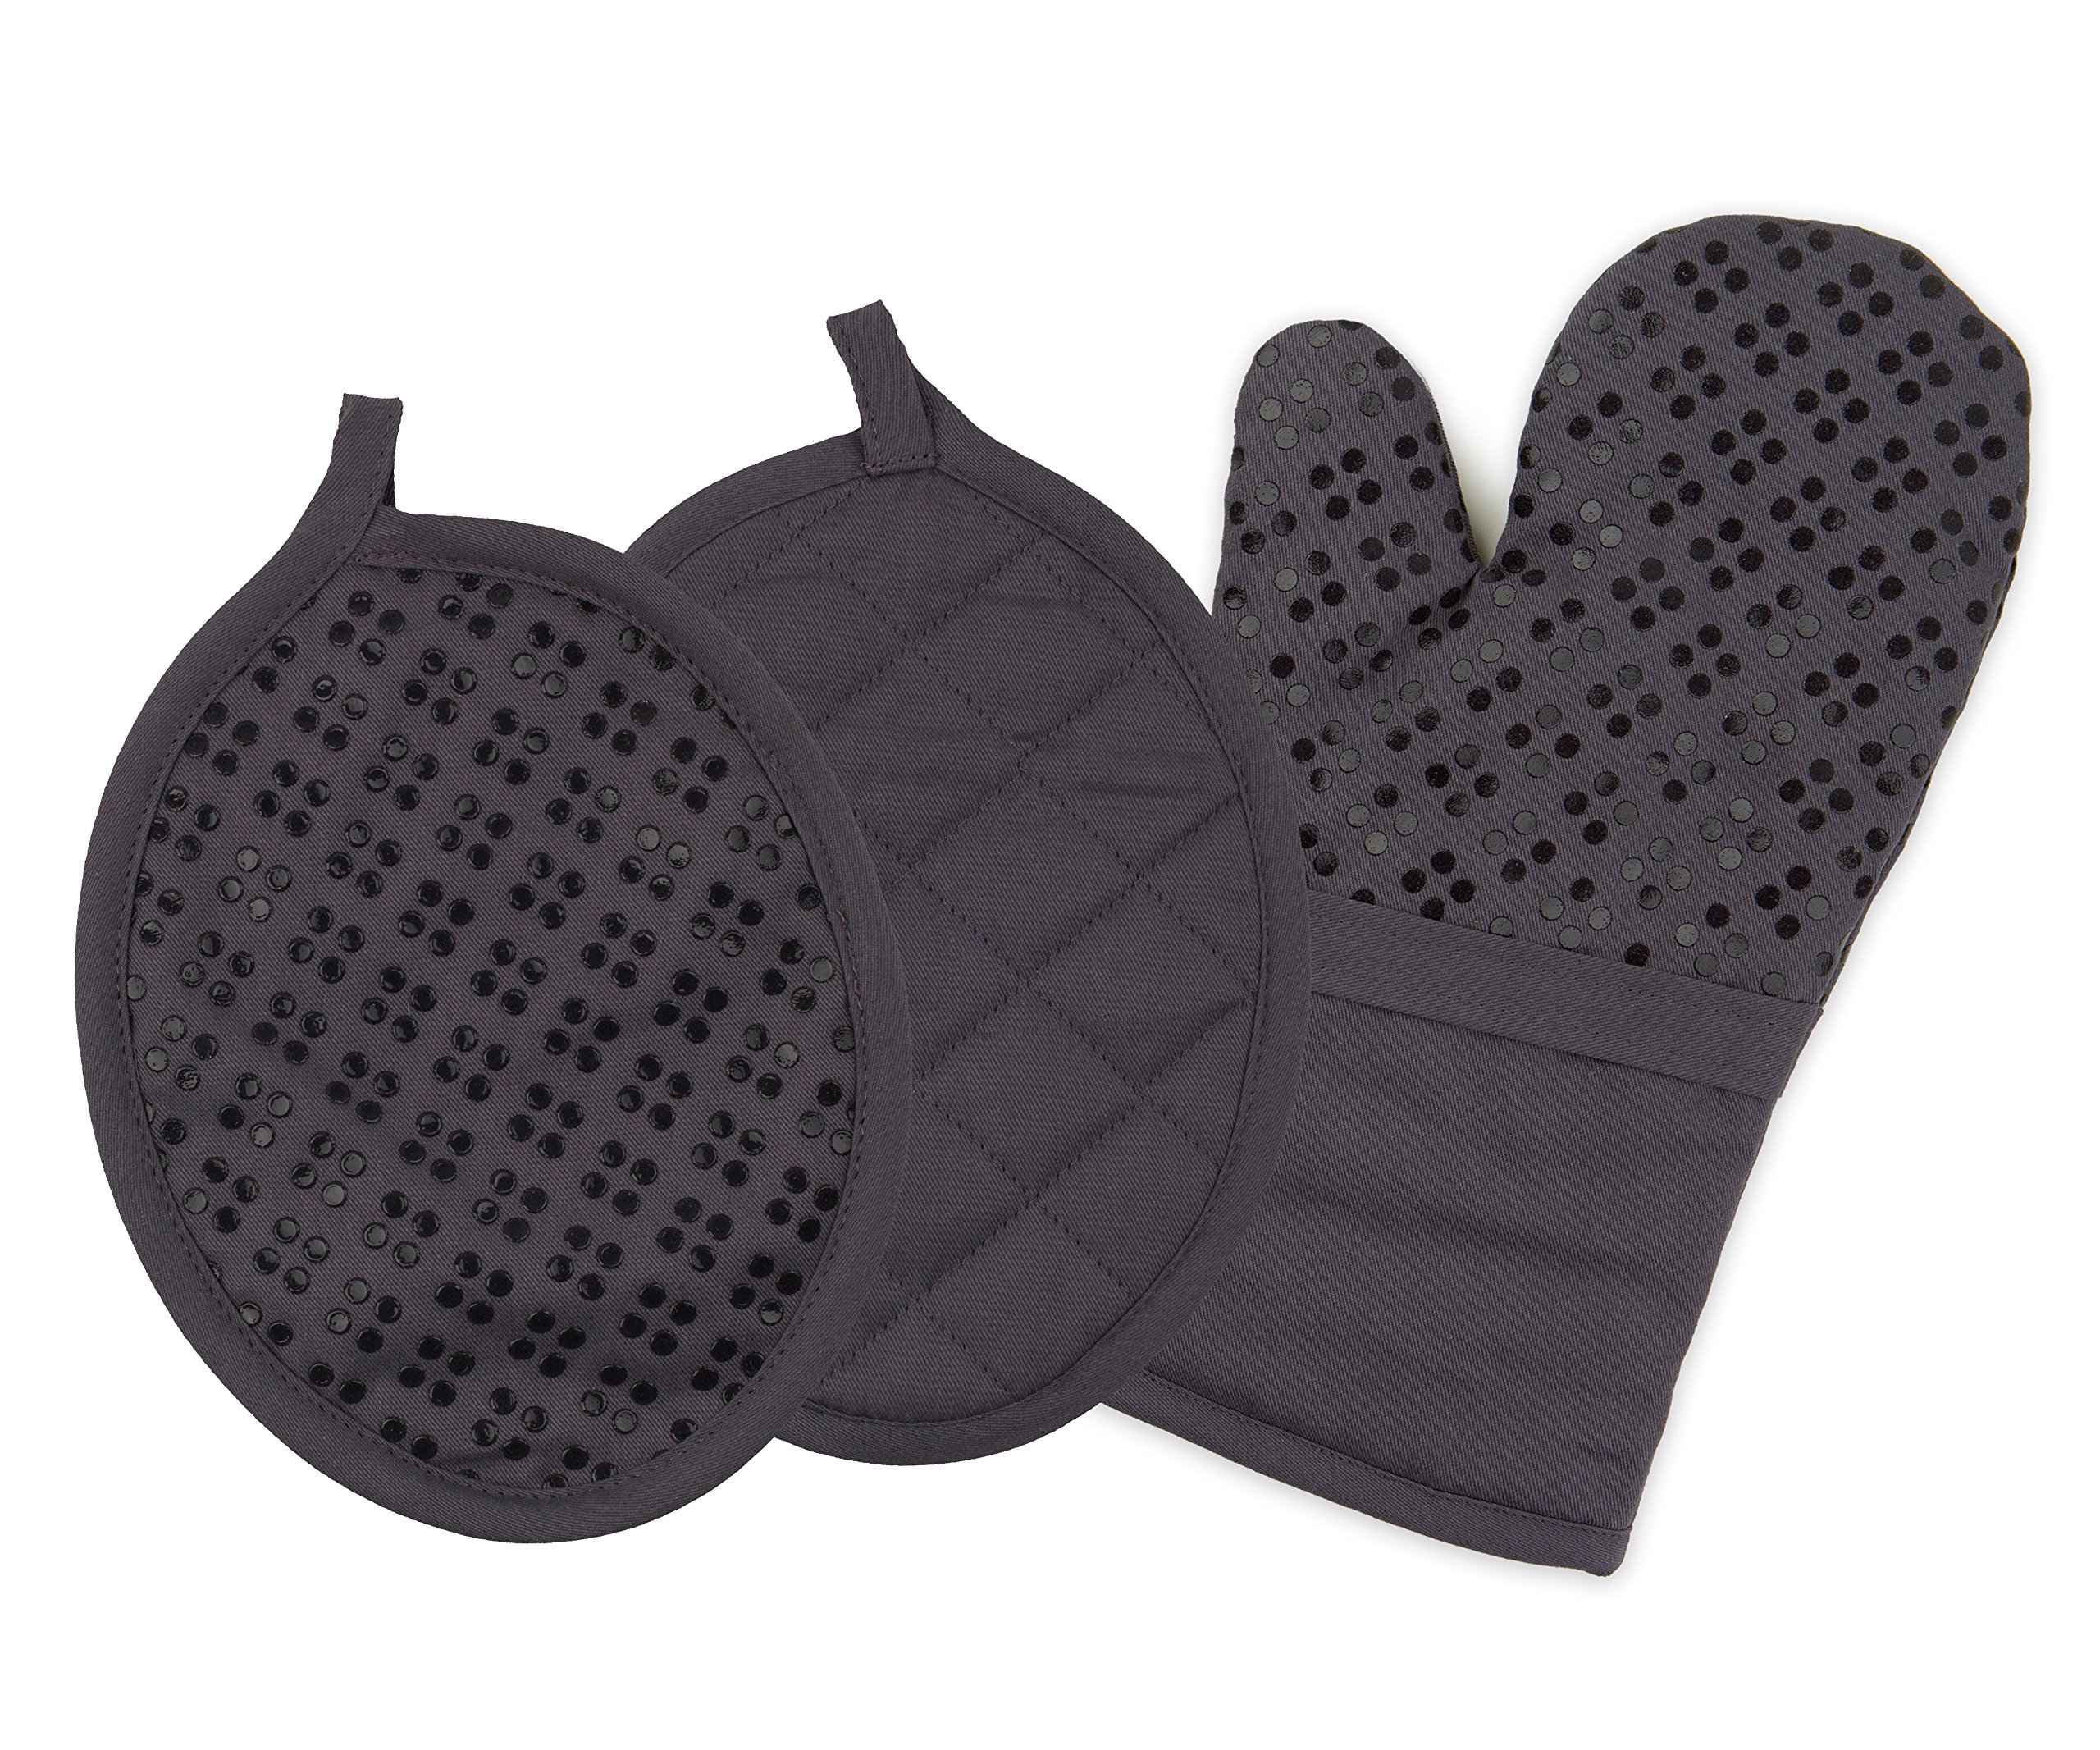 Book Cover Oven Mitt and Pot Holders Silicone Set of 3, Non-Slip Kitchen Hot Pads and Oven Mitts Set, Oeko-Tex 100% Cotton Shell, Gray 3 Piece Set Gray